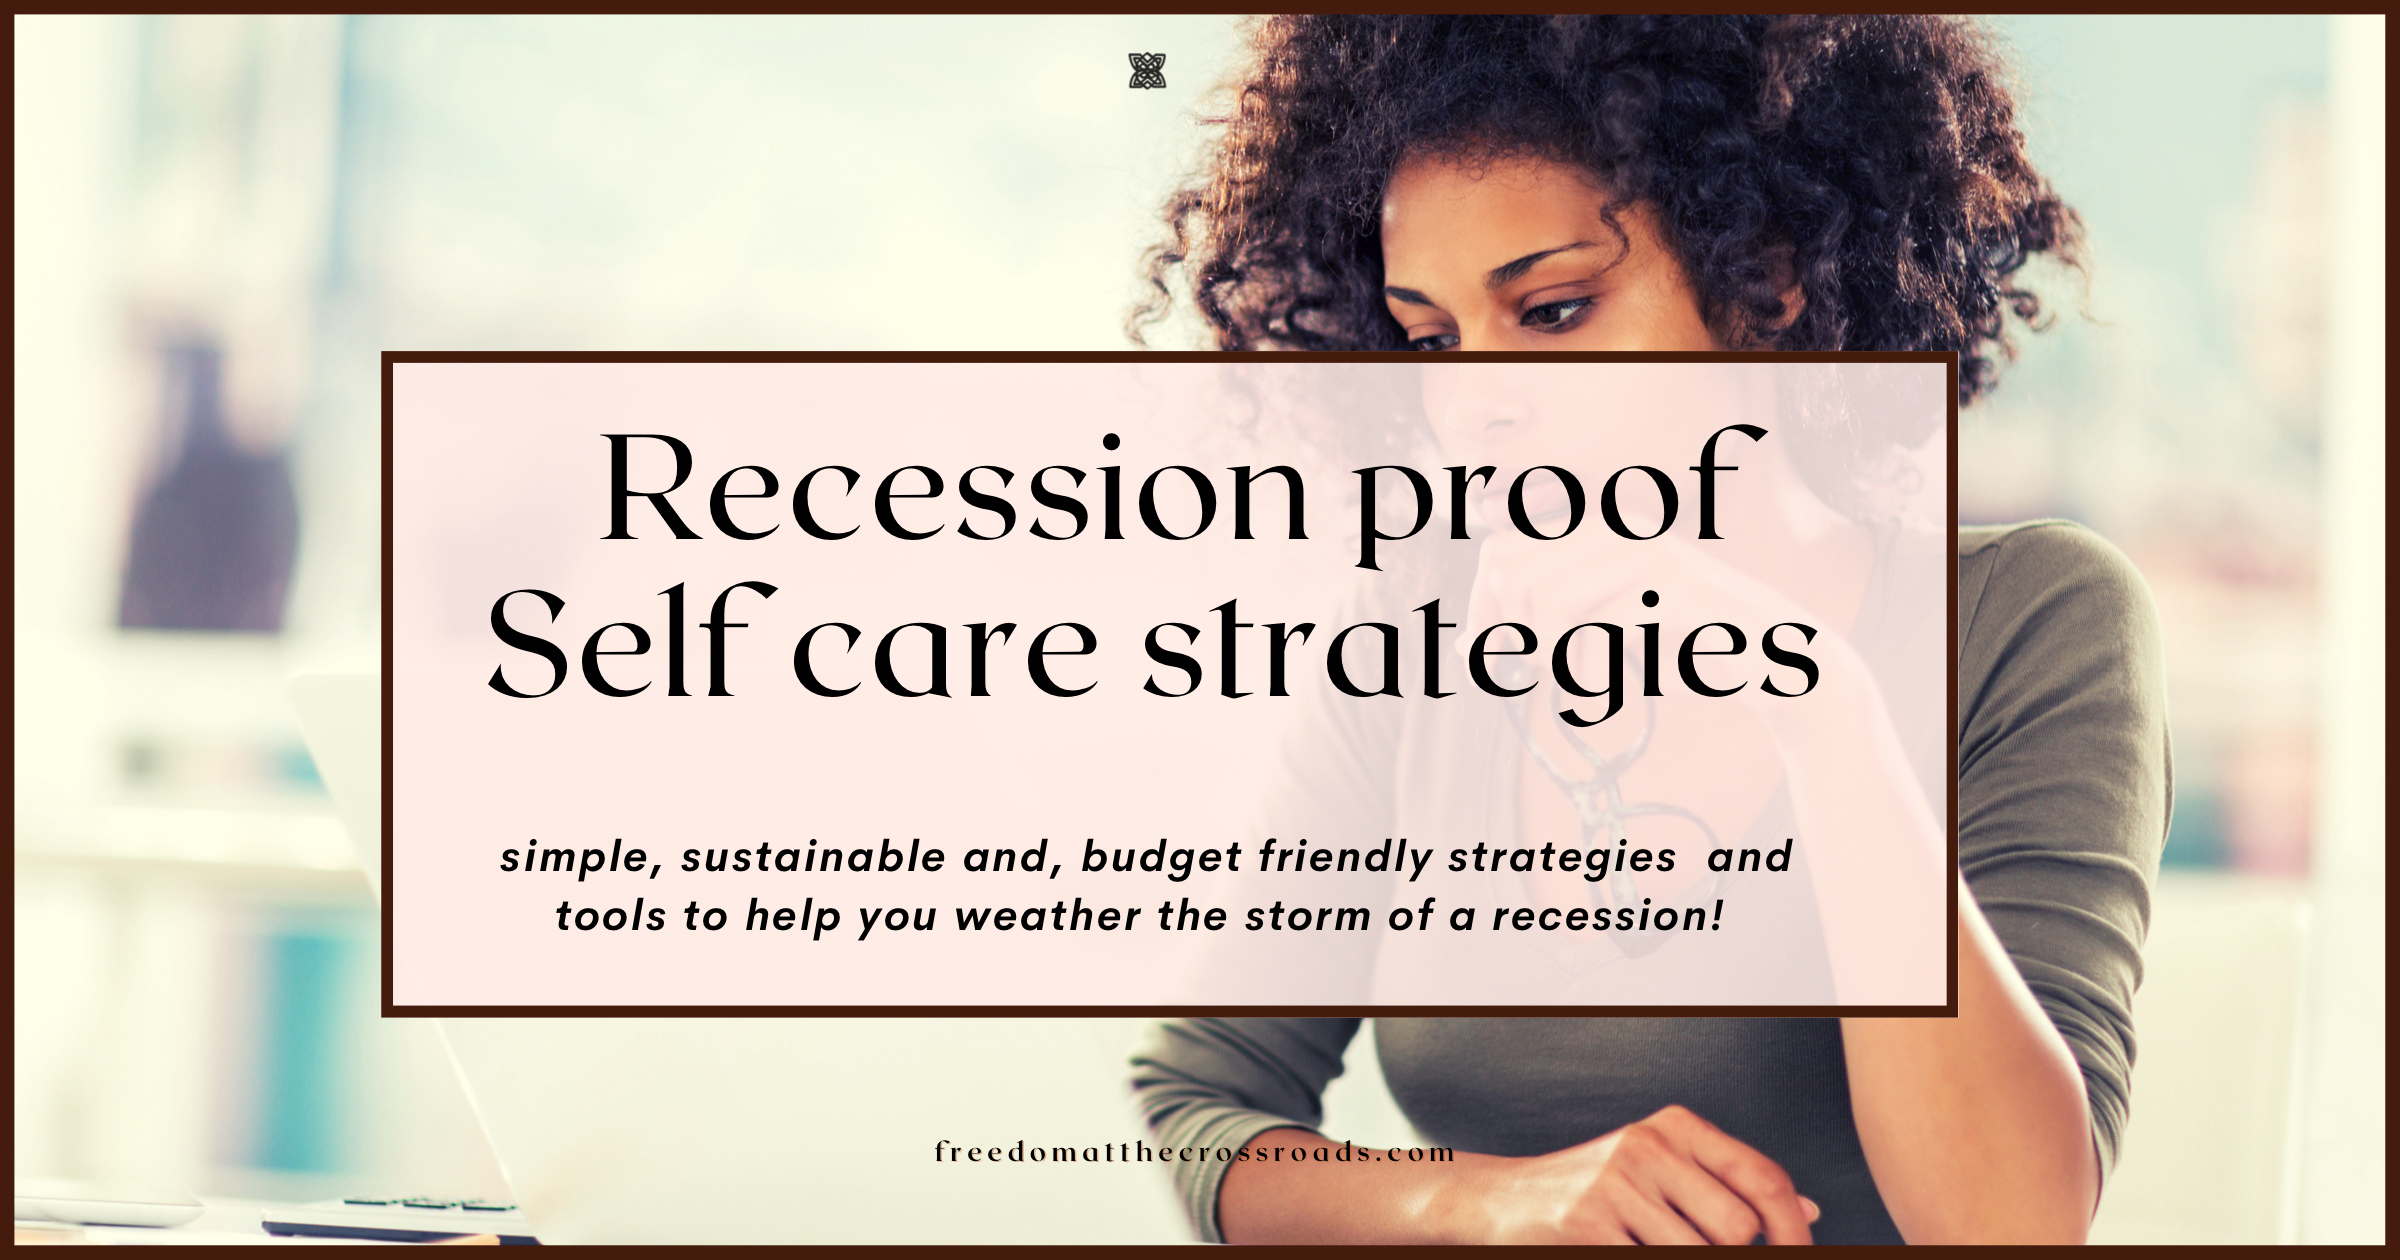 Recession proof self care strategies blog post feature image